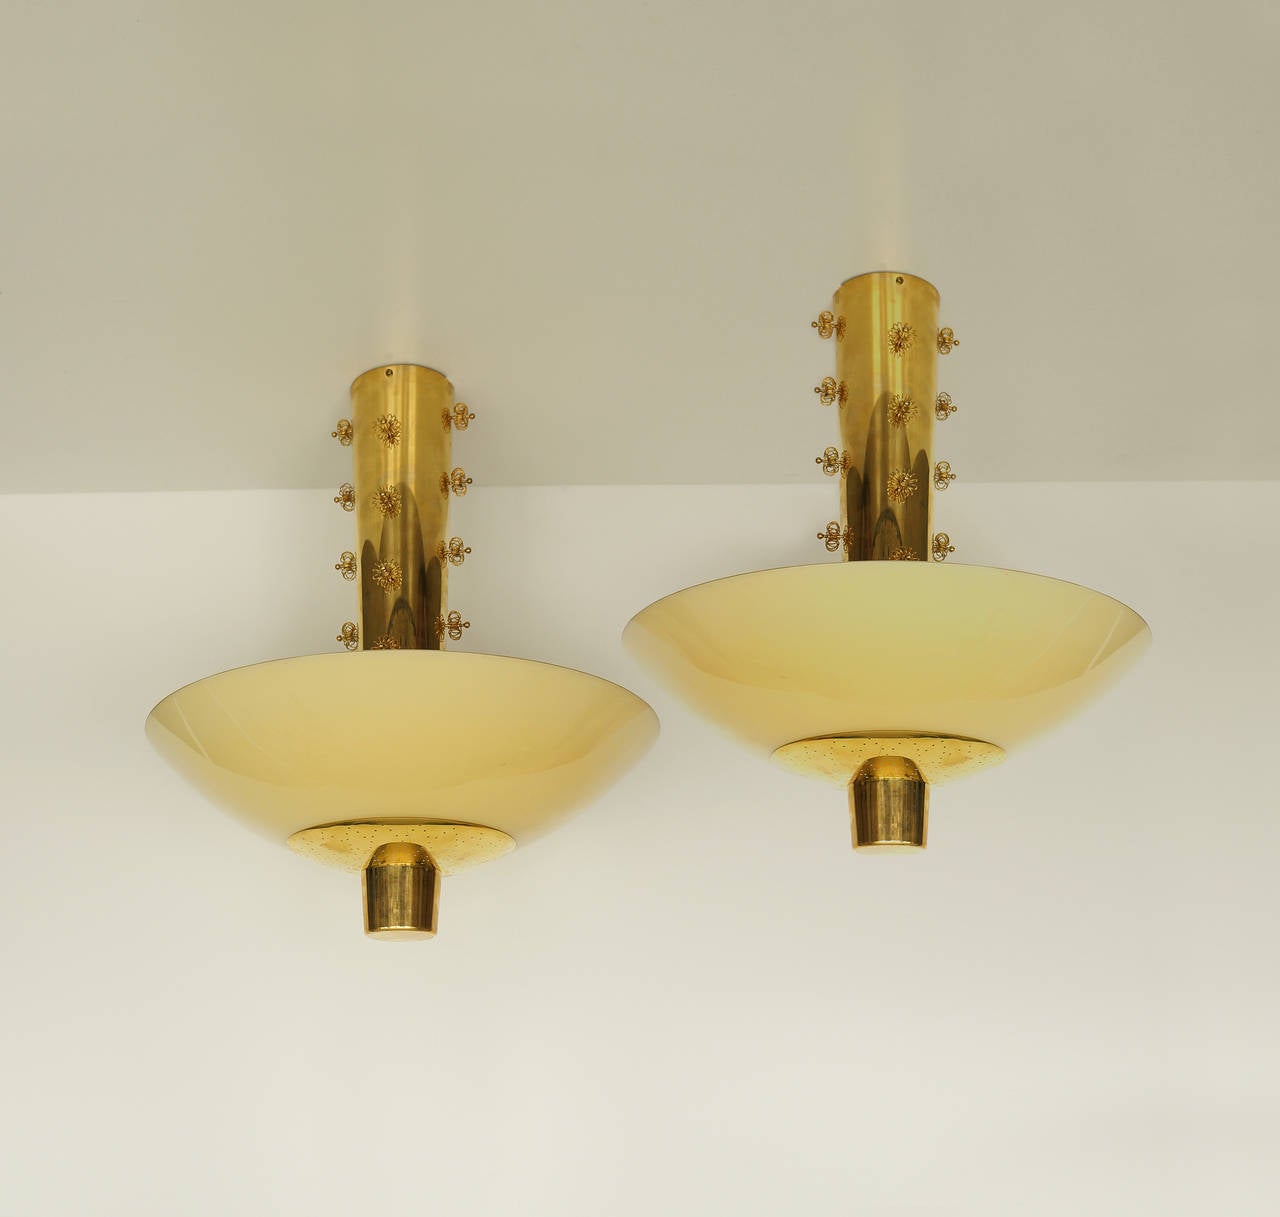 Paavo Tynell.

ceiling lights, (pair).

Taito Oy,
Finland, circa late 1940s.
Brass and mouth blown glass.
Measures: Height 62 cm x diameter 53 cm.

A rare pair of large ceiling lights by Paavo Tynell, late 1940s. Originally made by order